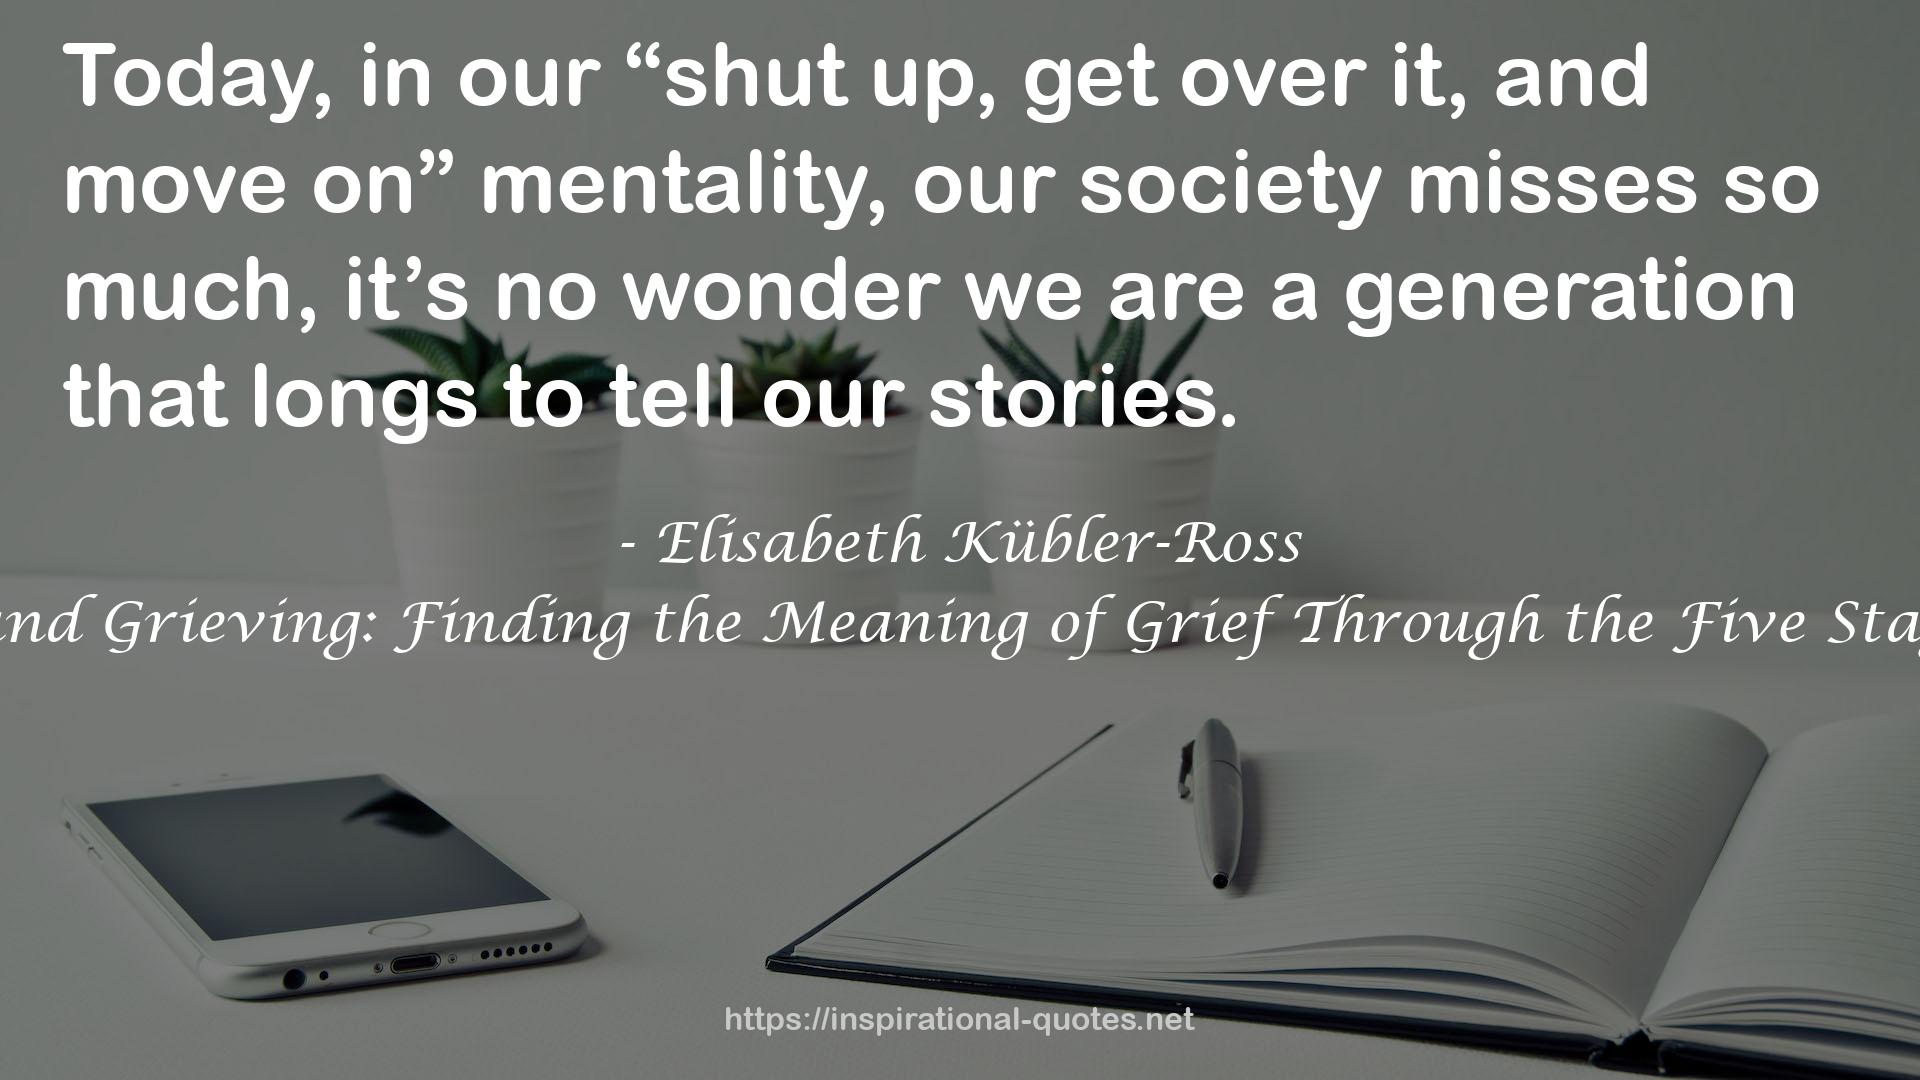 On Grief and Grieving: Finding the Meaning of Grief Through the Five Stages of Loss QUOTES